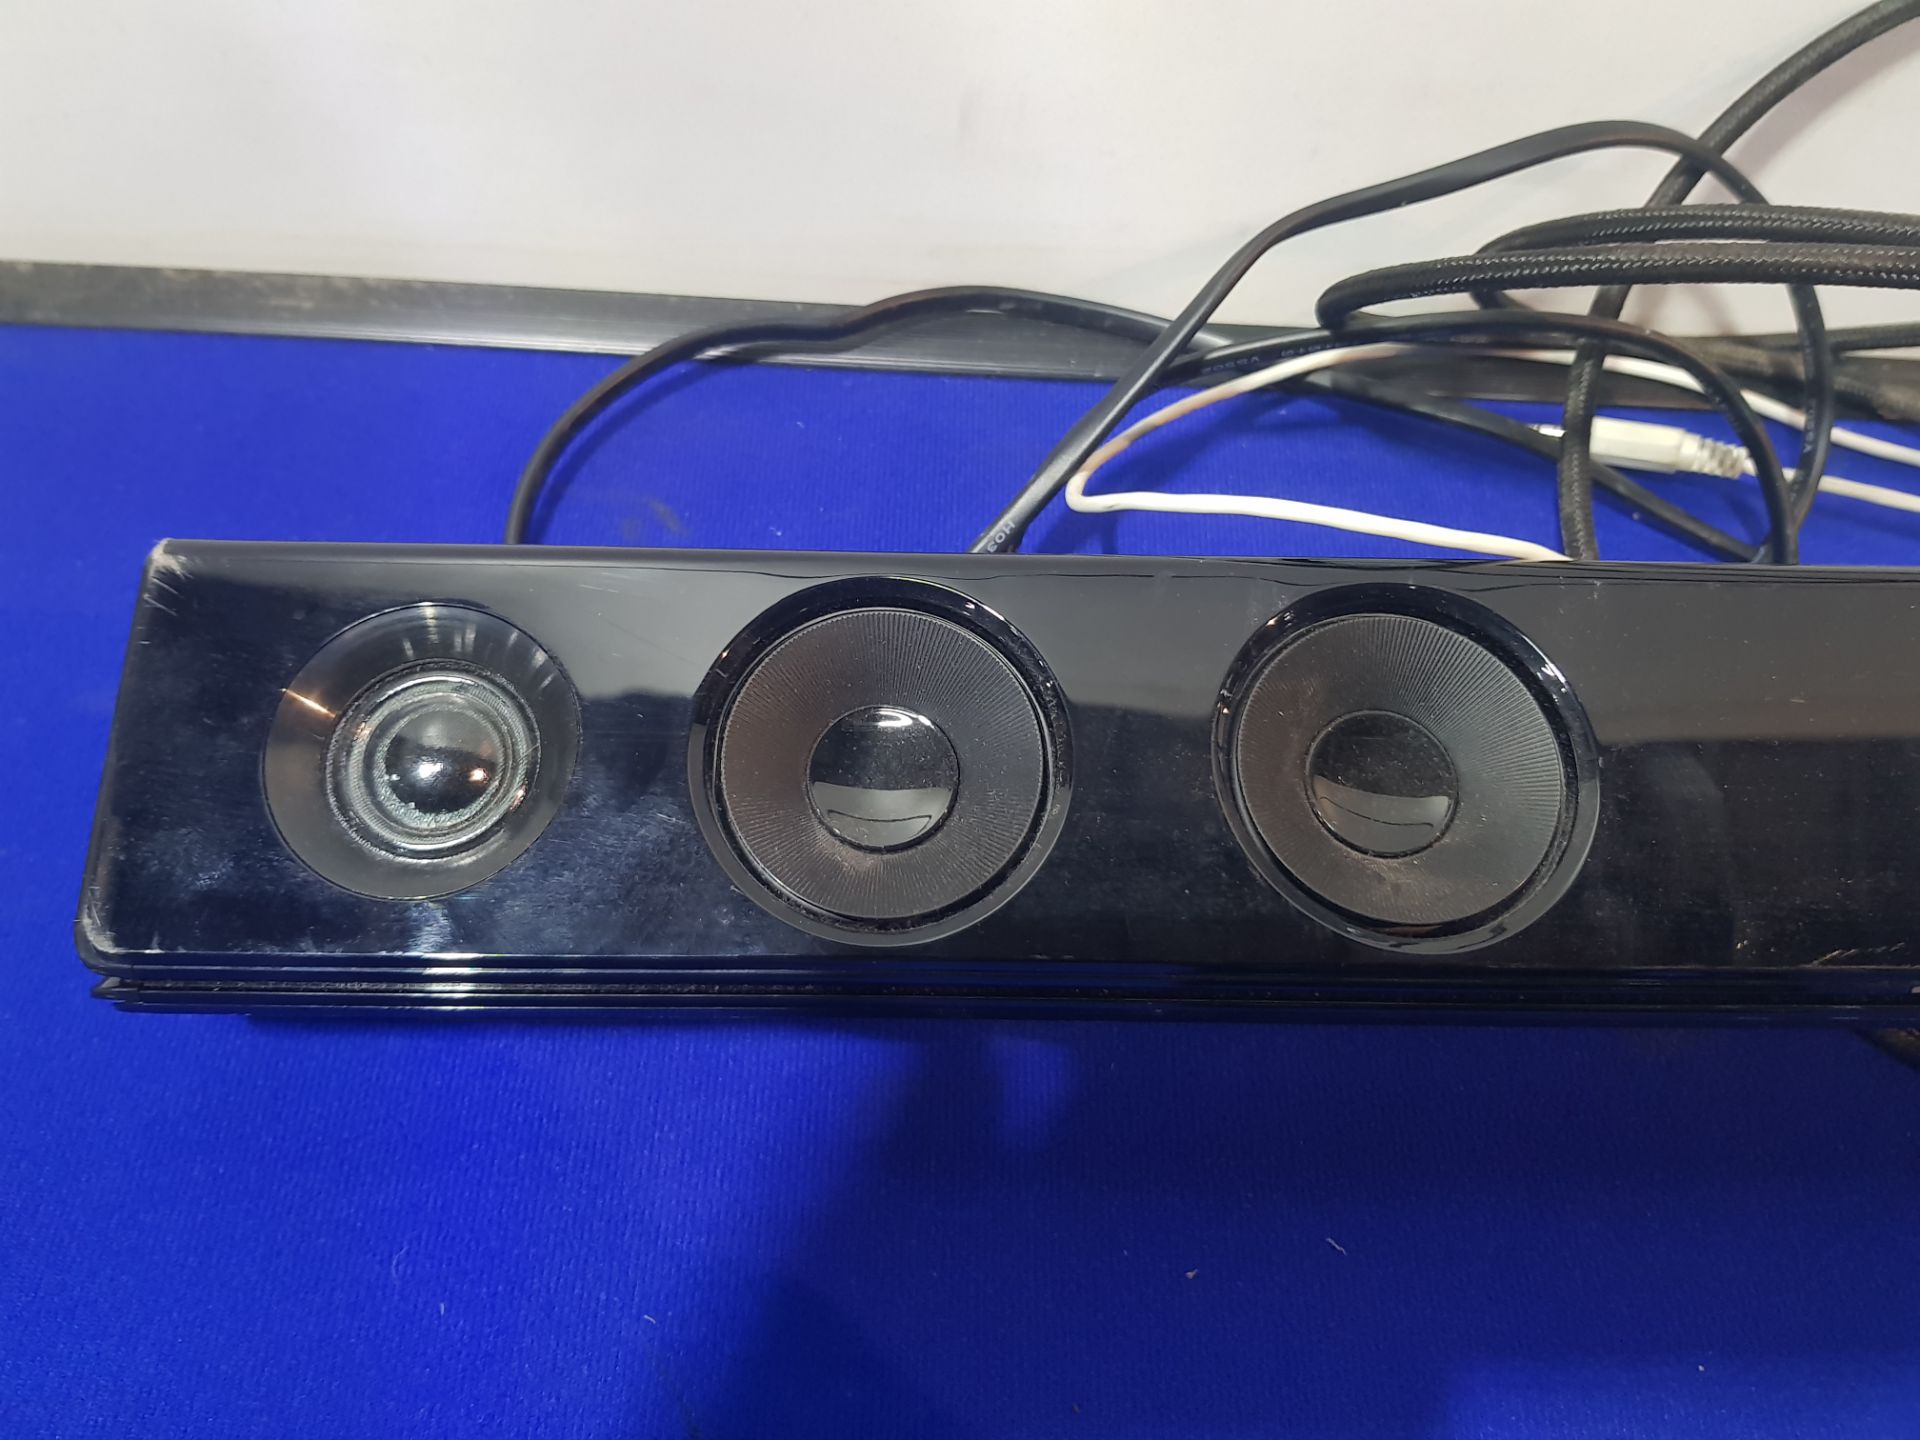 LG 300W 21 Channel Wireless Speaker Bar With Bluetooth - Image 2 of 6